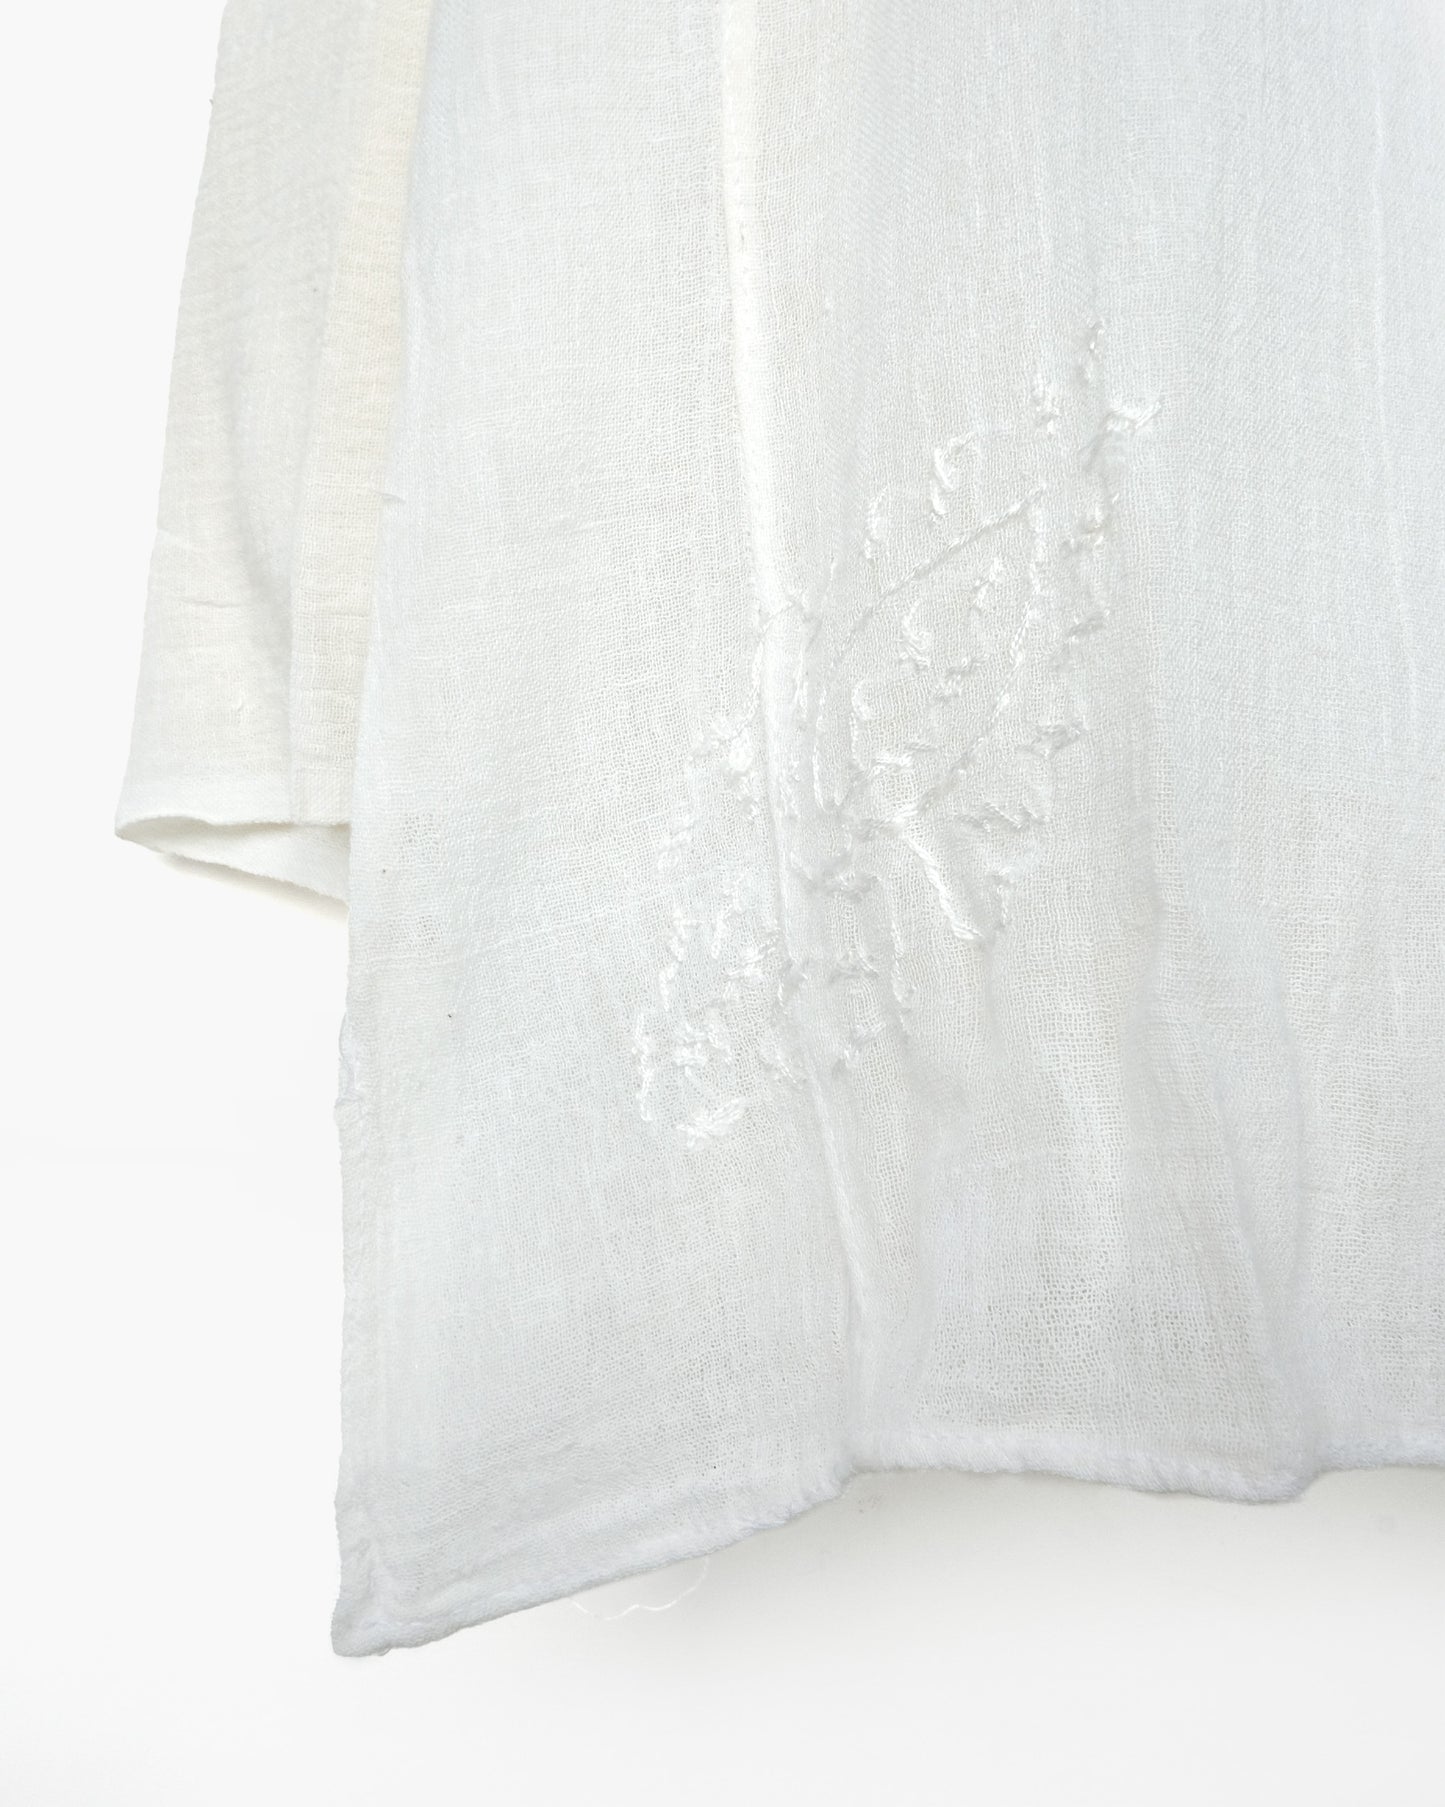 Gauze Shirts Made in India